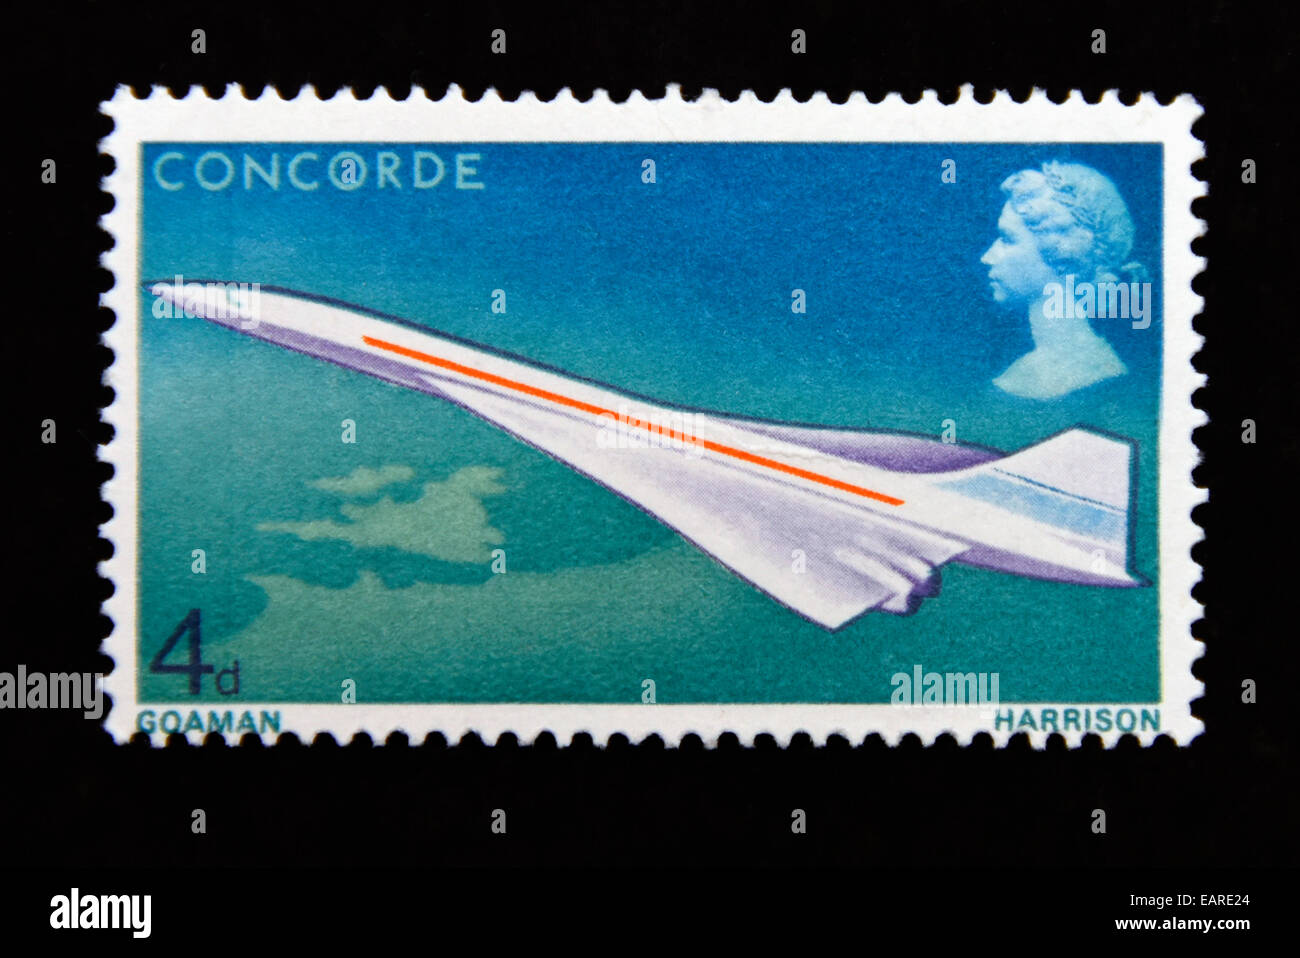 Concorde First Day Covers Stamps Queen Of The Skies Cards In Great Condition